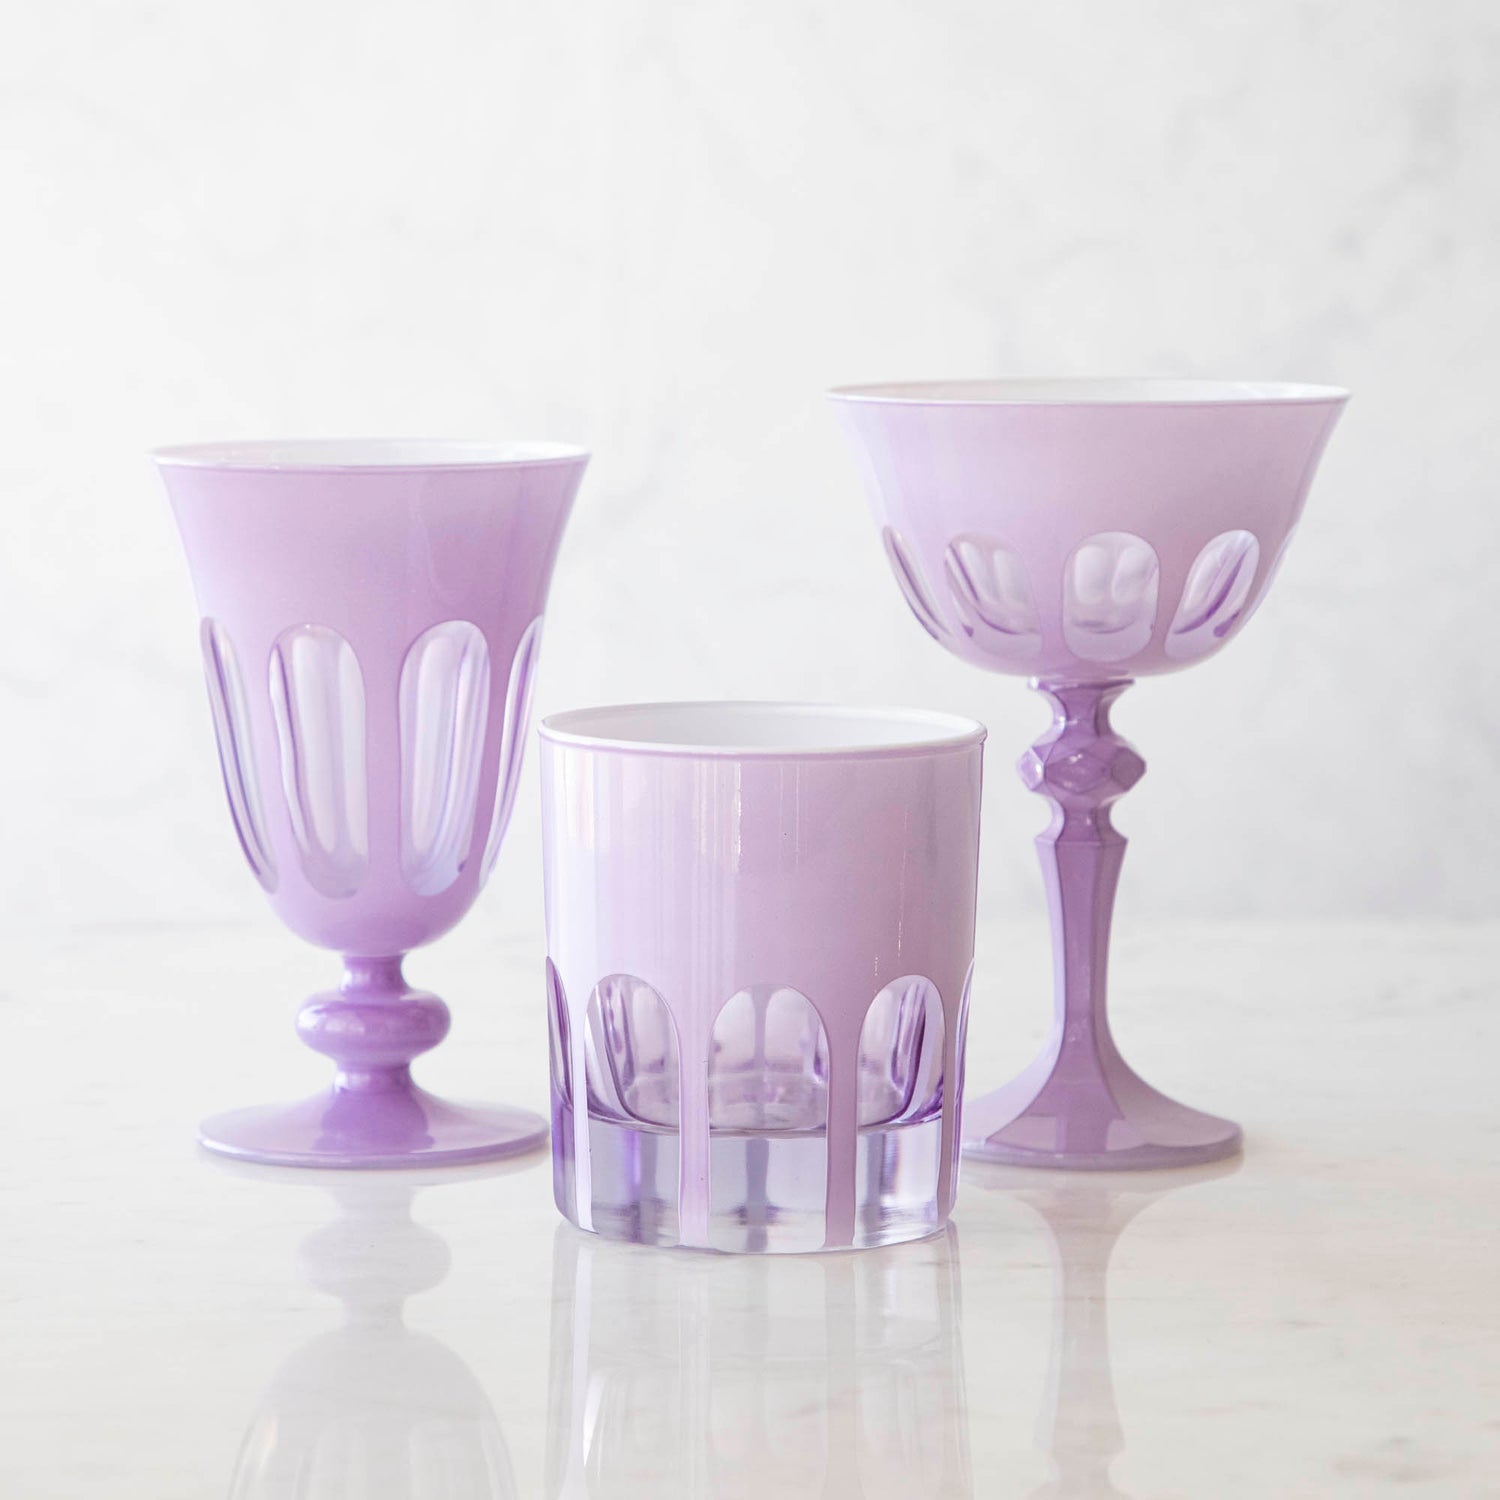 Three Set of 2 Rialto Lupine (Light Purple) Glasses by SIR/MADAM on a marble table.